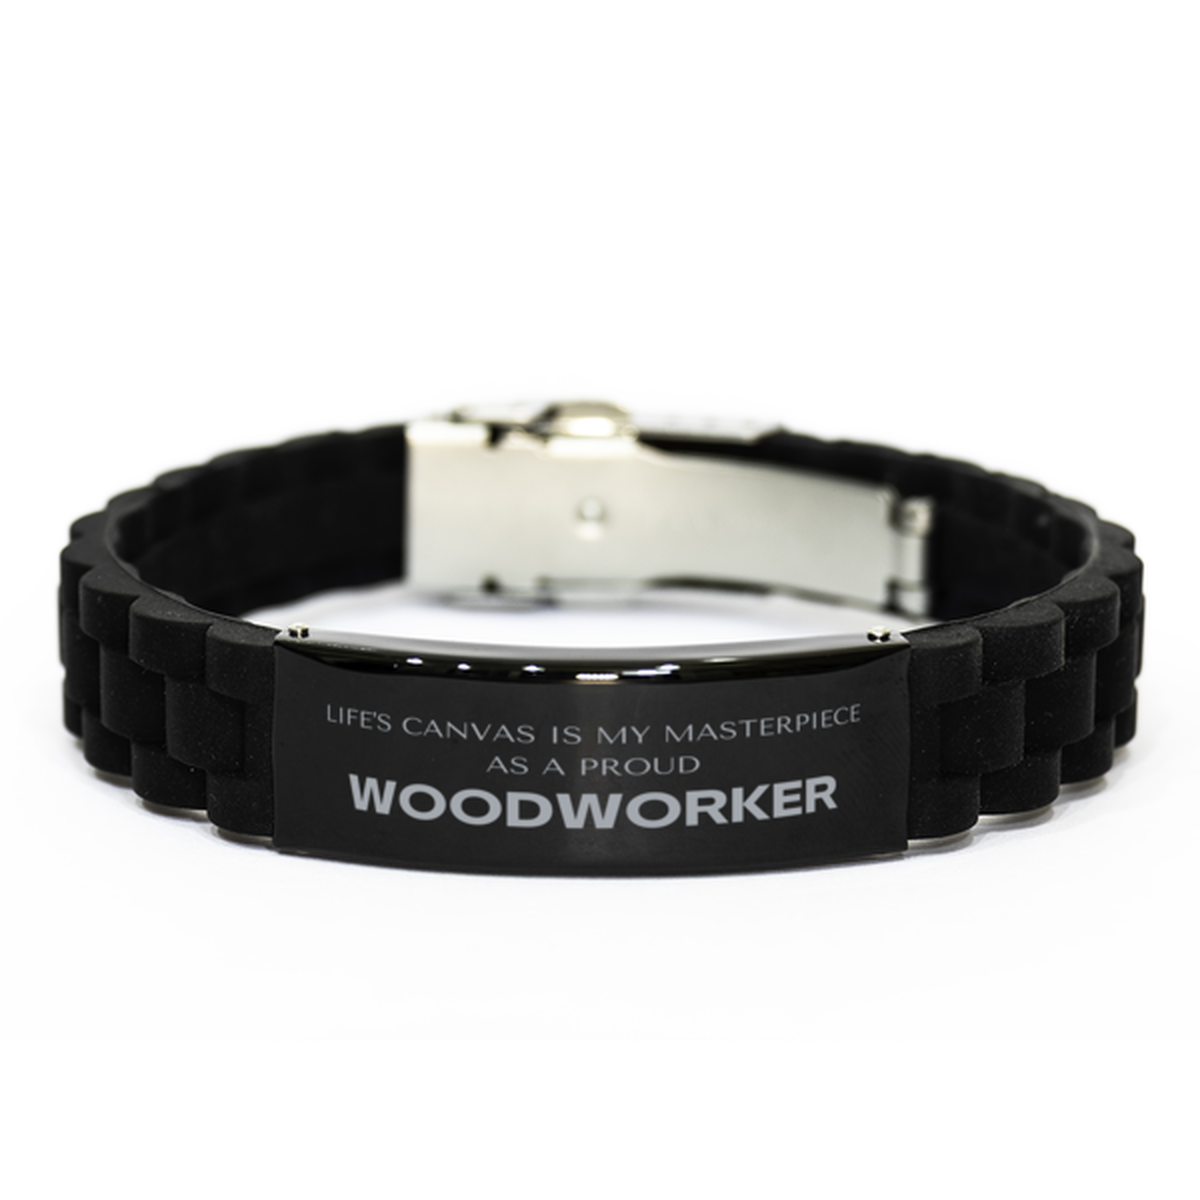 Proud Woodworker Gifts, Life's canvas is my masterpiece, Epic Birthday Christmas Unique Black Glidelock Clasp Bracelet For Woodworker, Coworkers, Men, Women, Friends